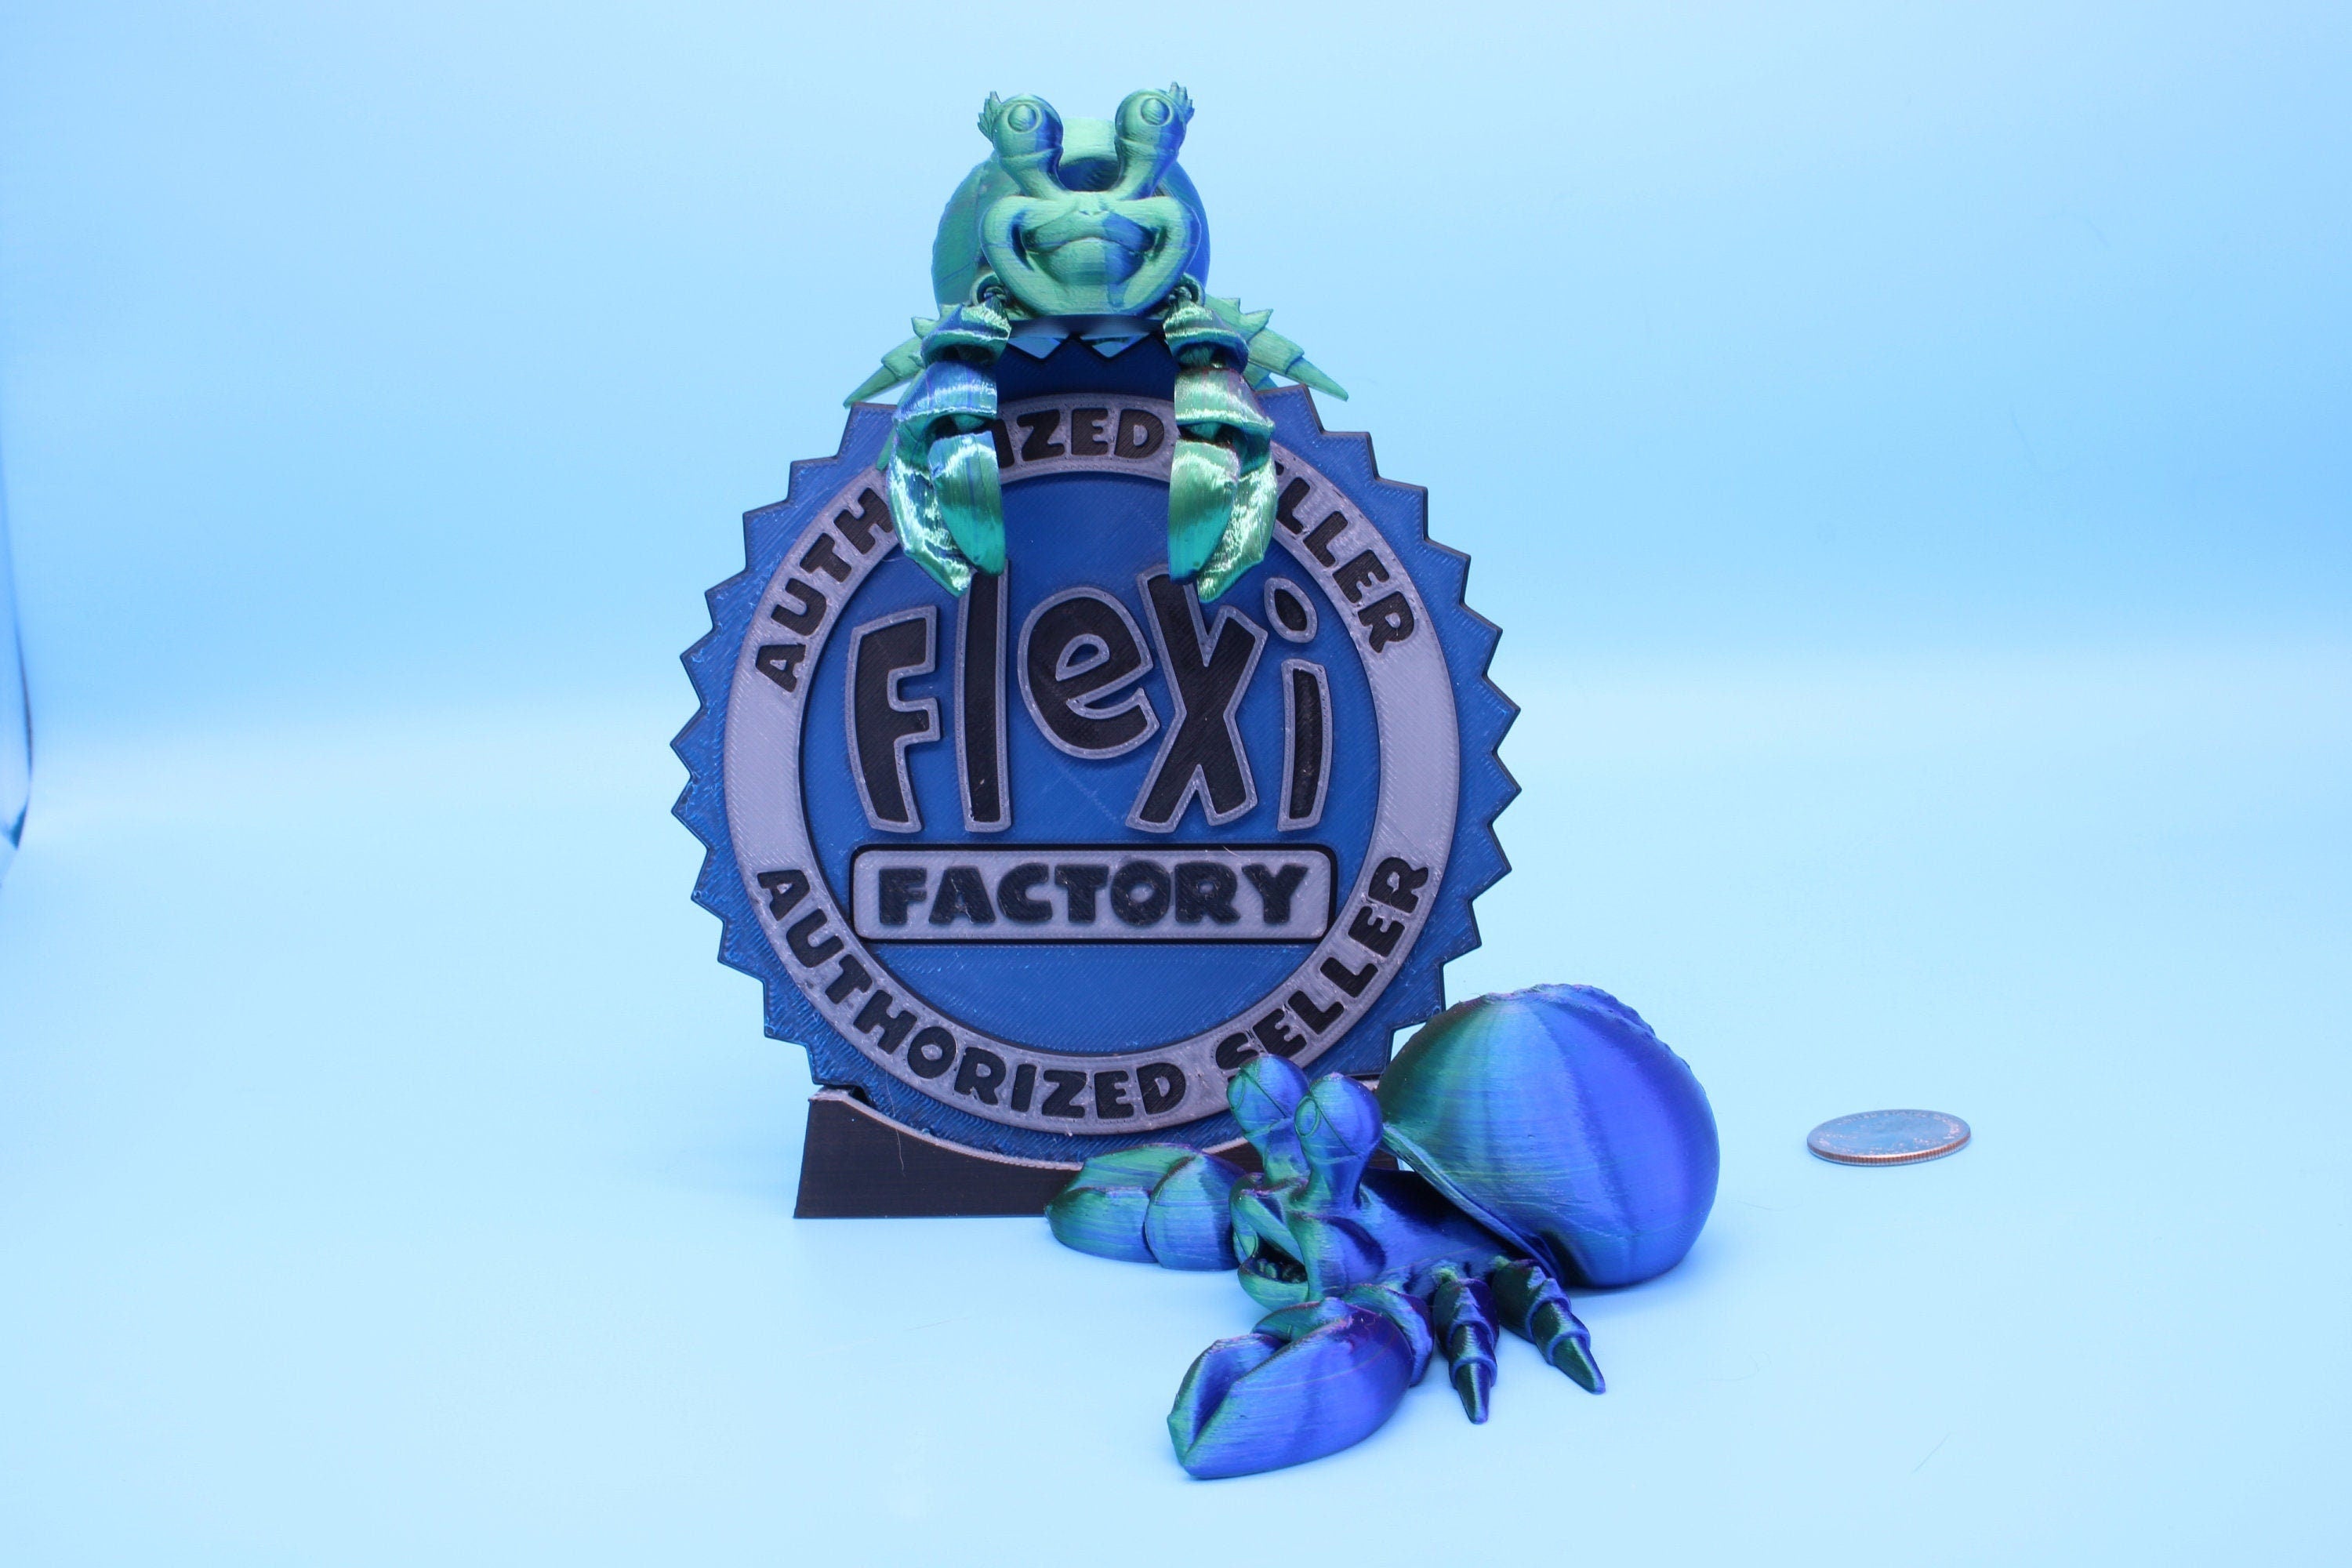 Articulating Multi Color Flexi Hermit Crab Mr. & Mrs. 3D Printed. Super cute, friendly crabs. Great fidget toy, buddy, Sensory toy for all.